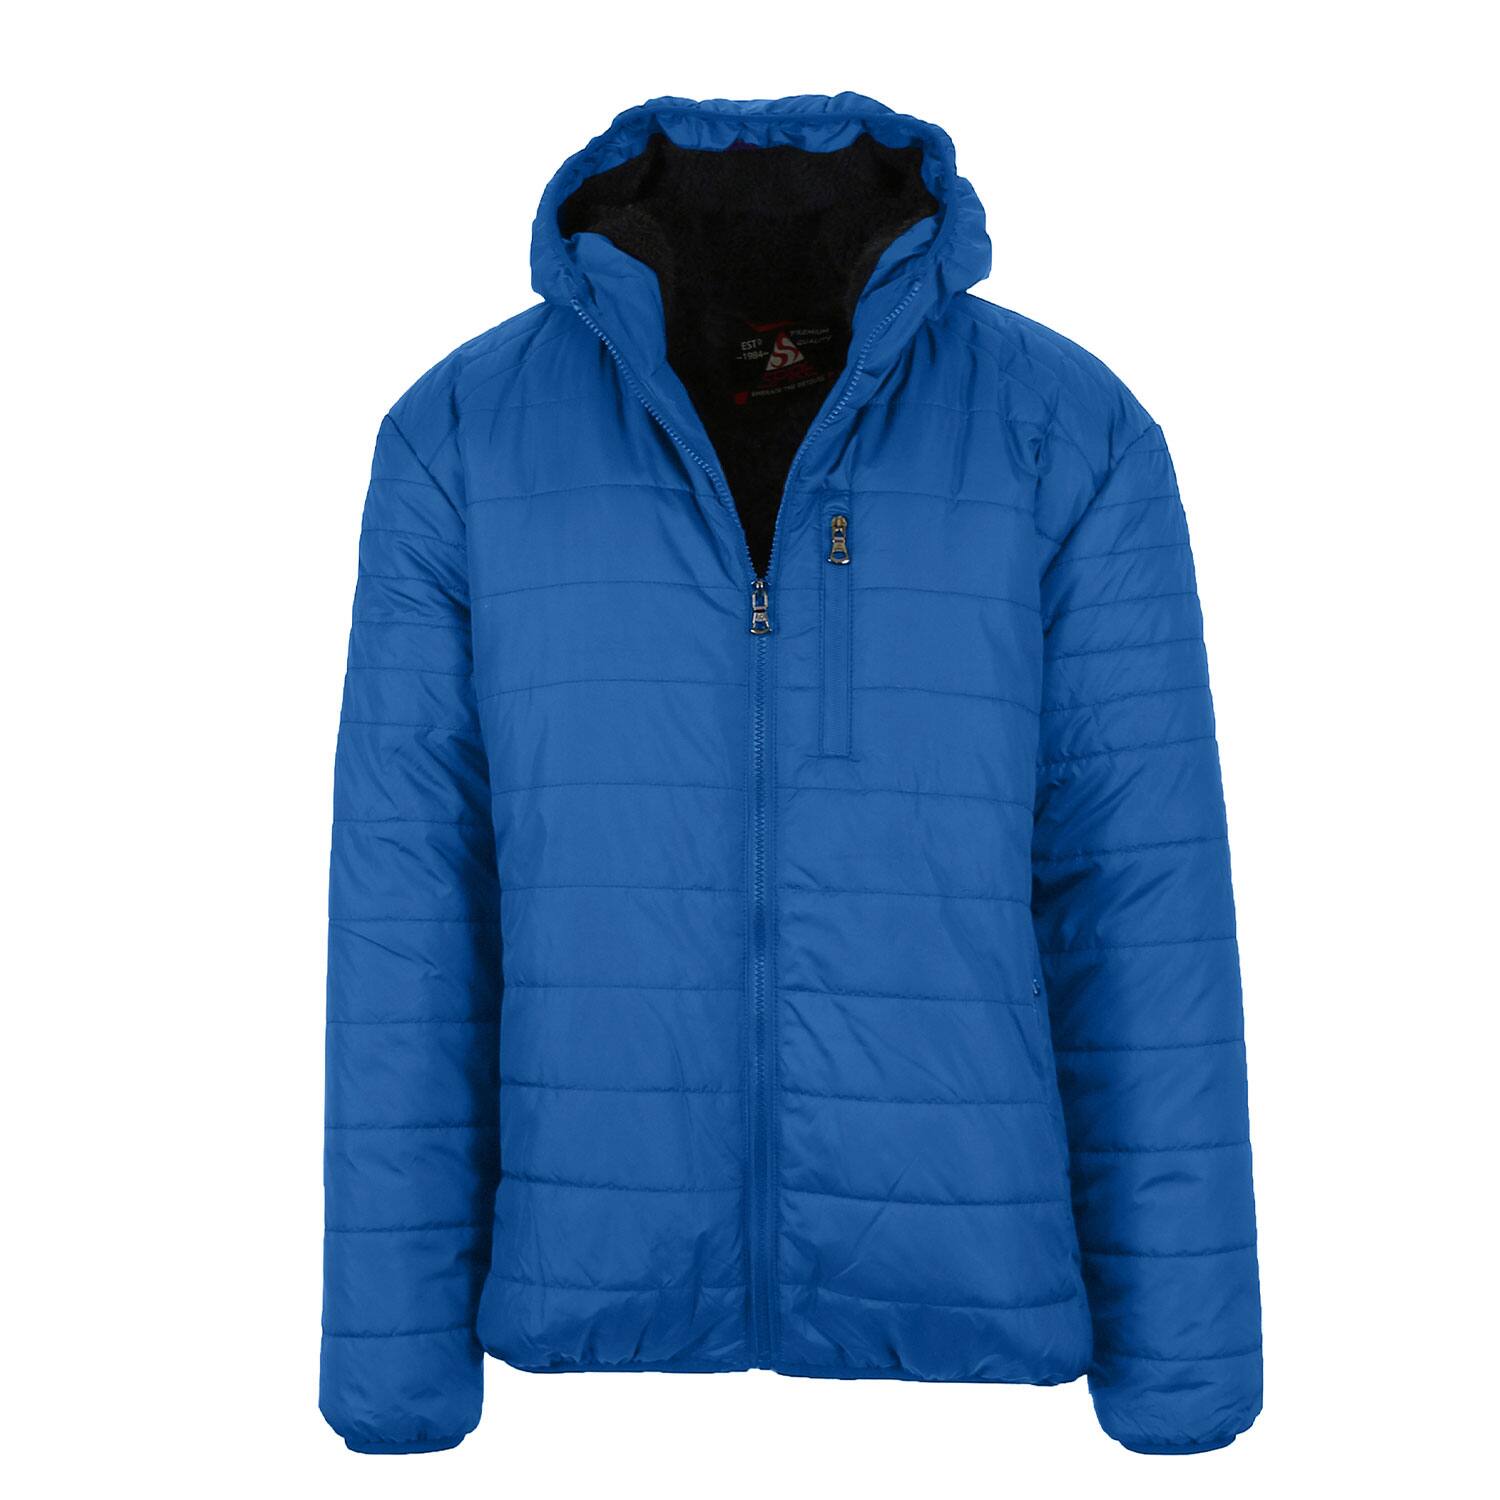 Men's Sherpa-Lined Hooded Puffer Jacket $29.74 + Free shipping